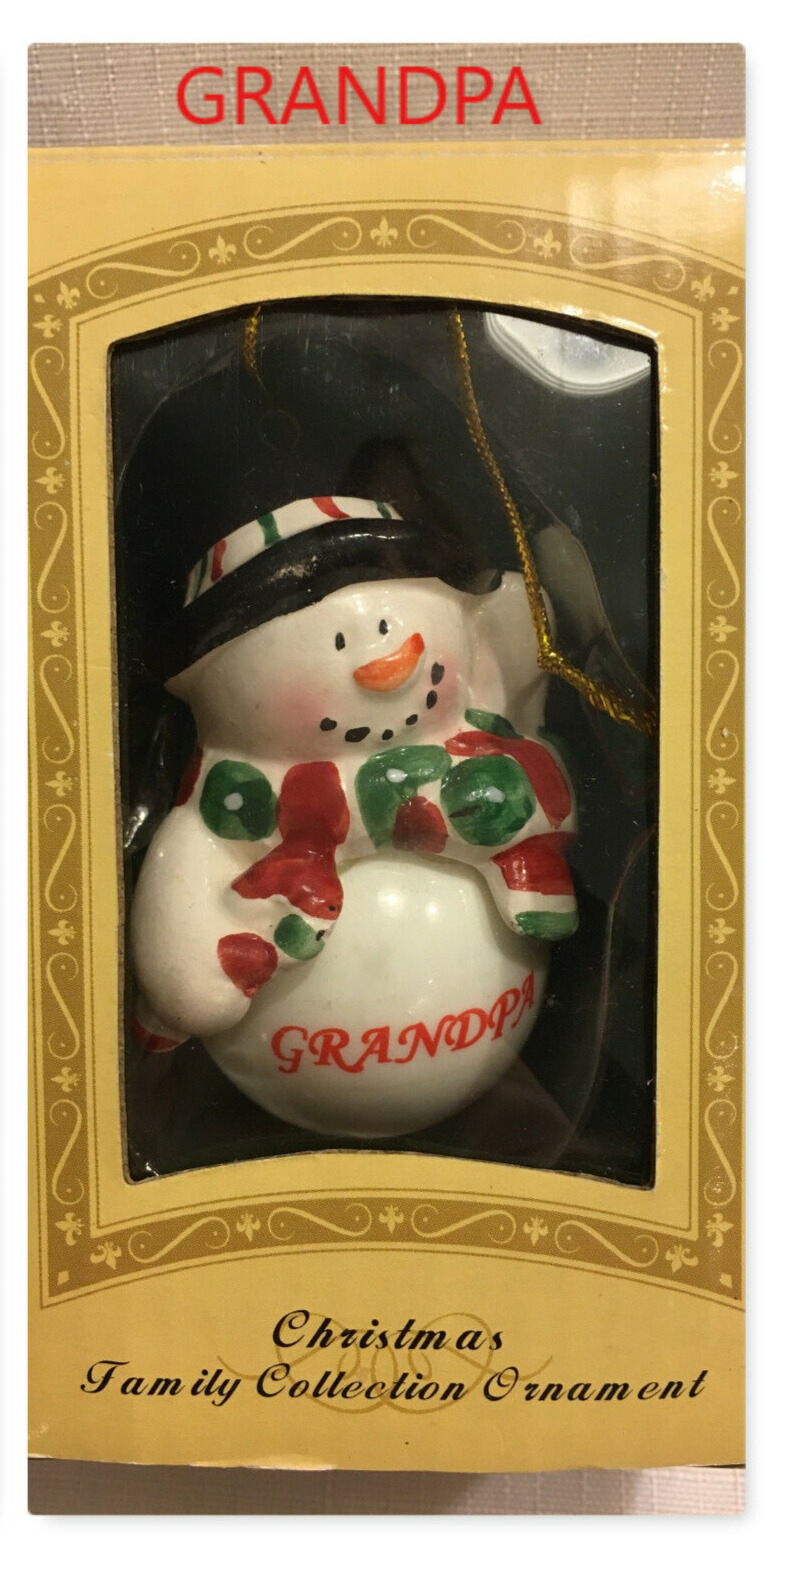 World Wide Basix Christmas Family Collection Ornament GRANDPA Vintage 